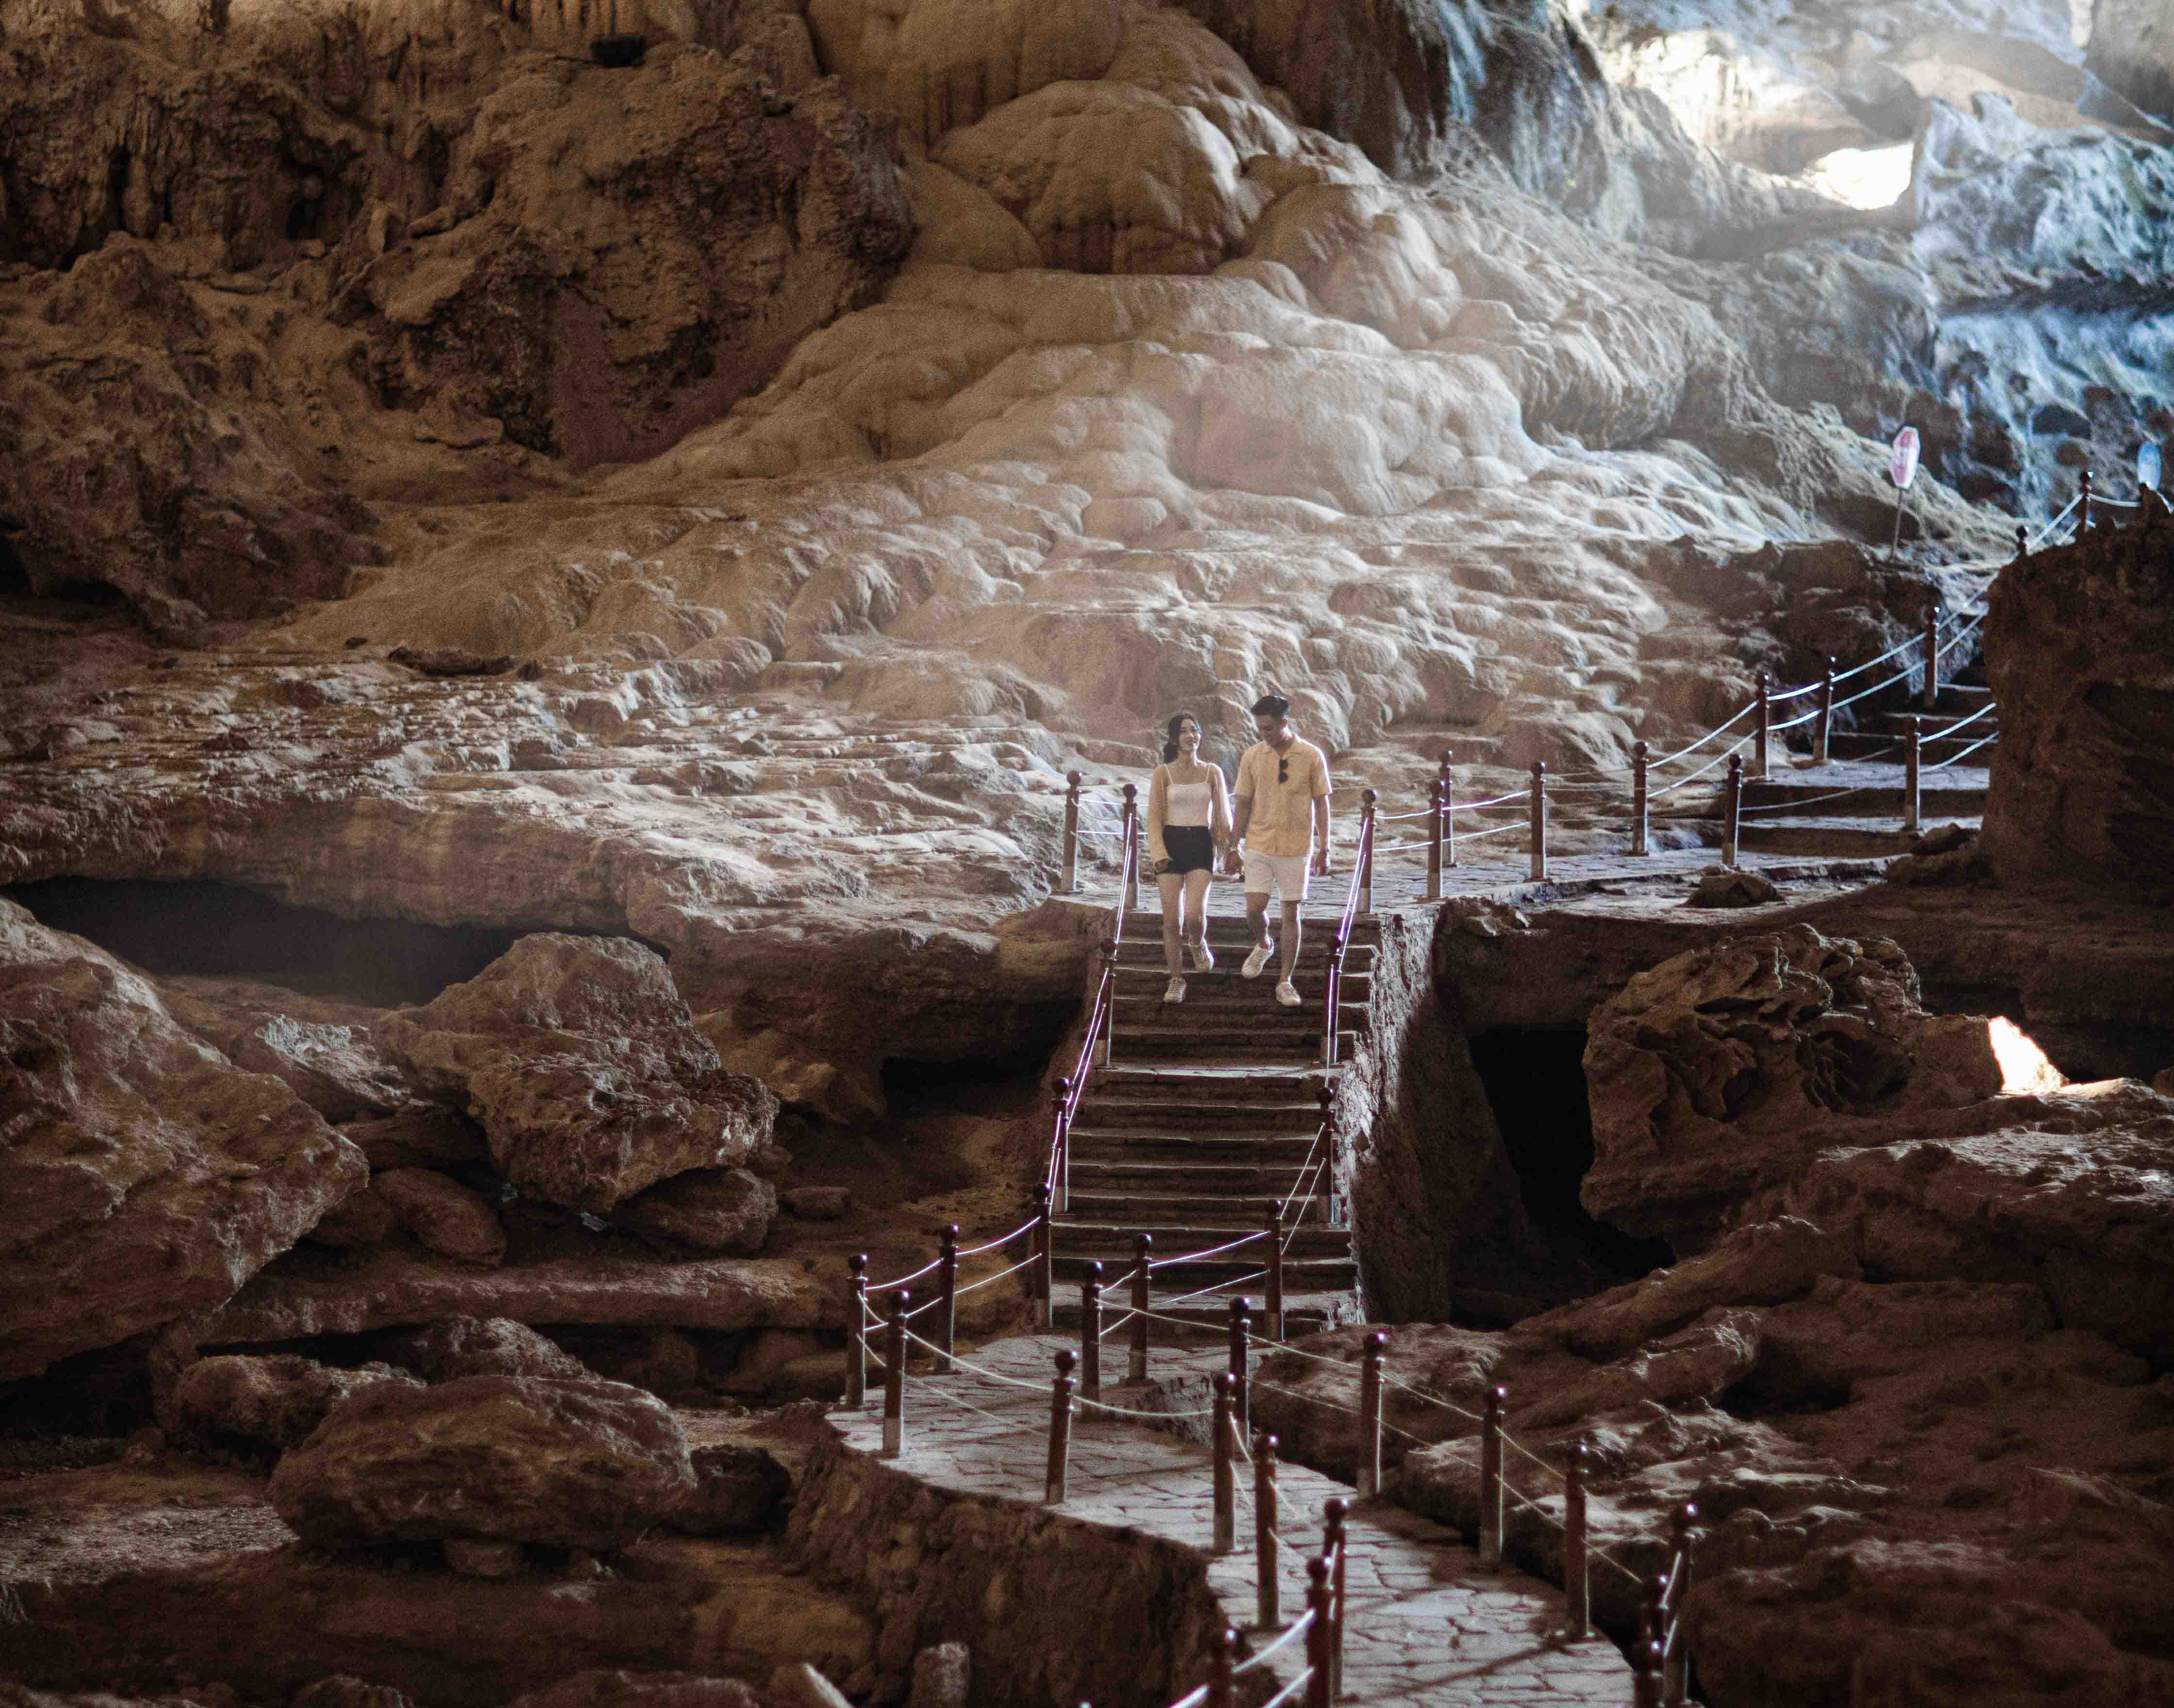 Visiting Sung Sot Cave